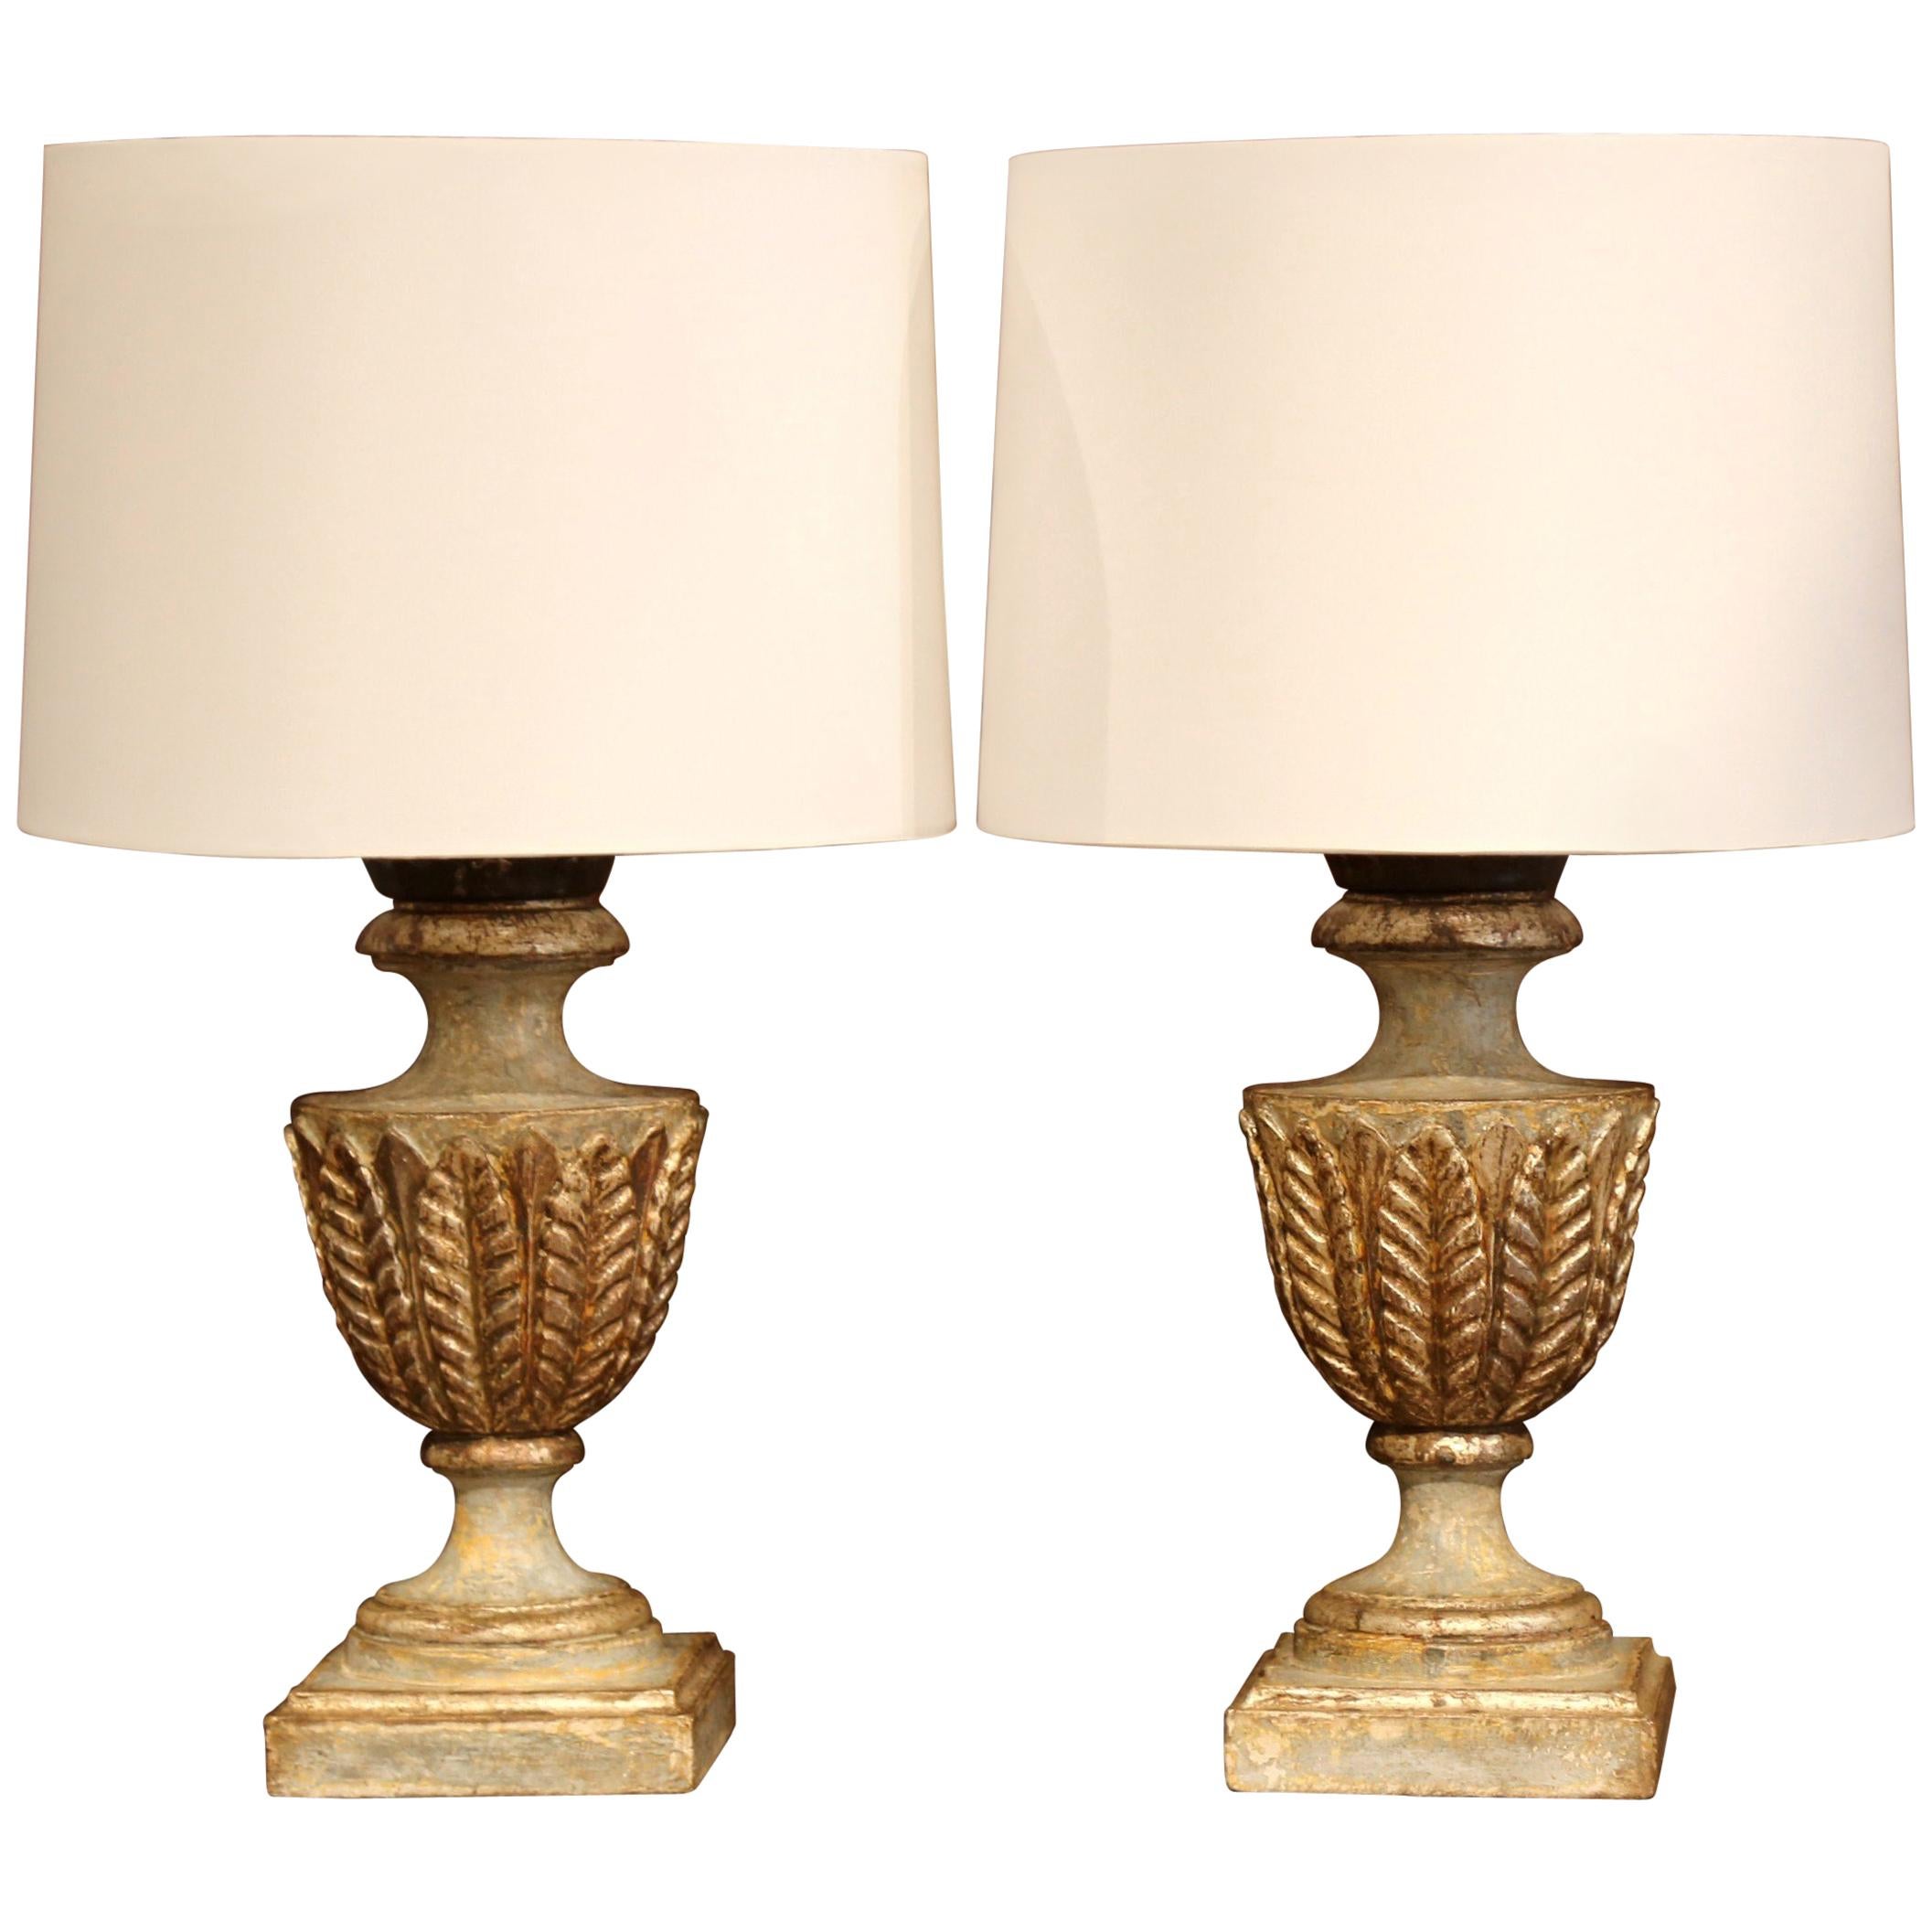 Pair of Italian Wood Carved Polychrome and Two-Tone Painted Urns Table Lamps